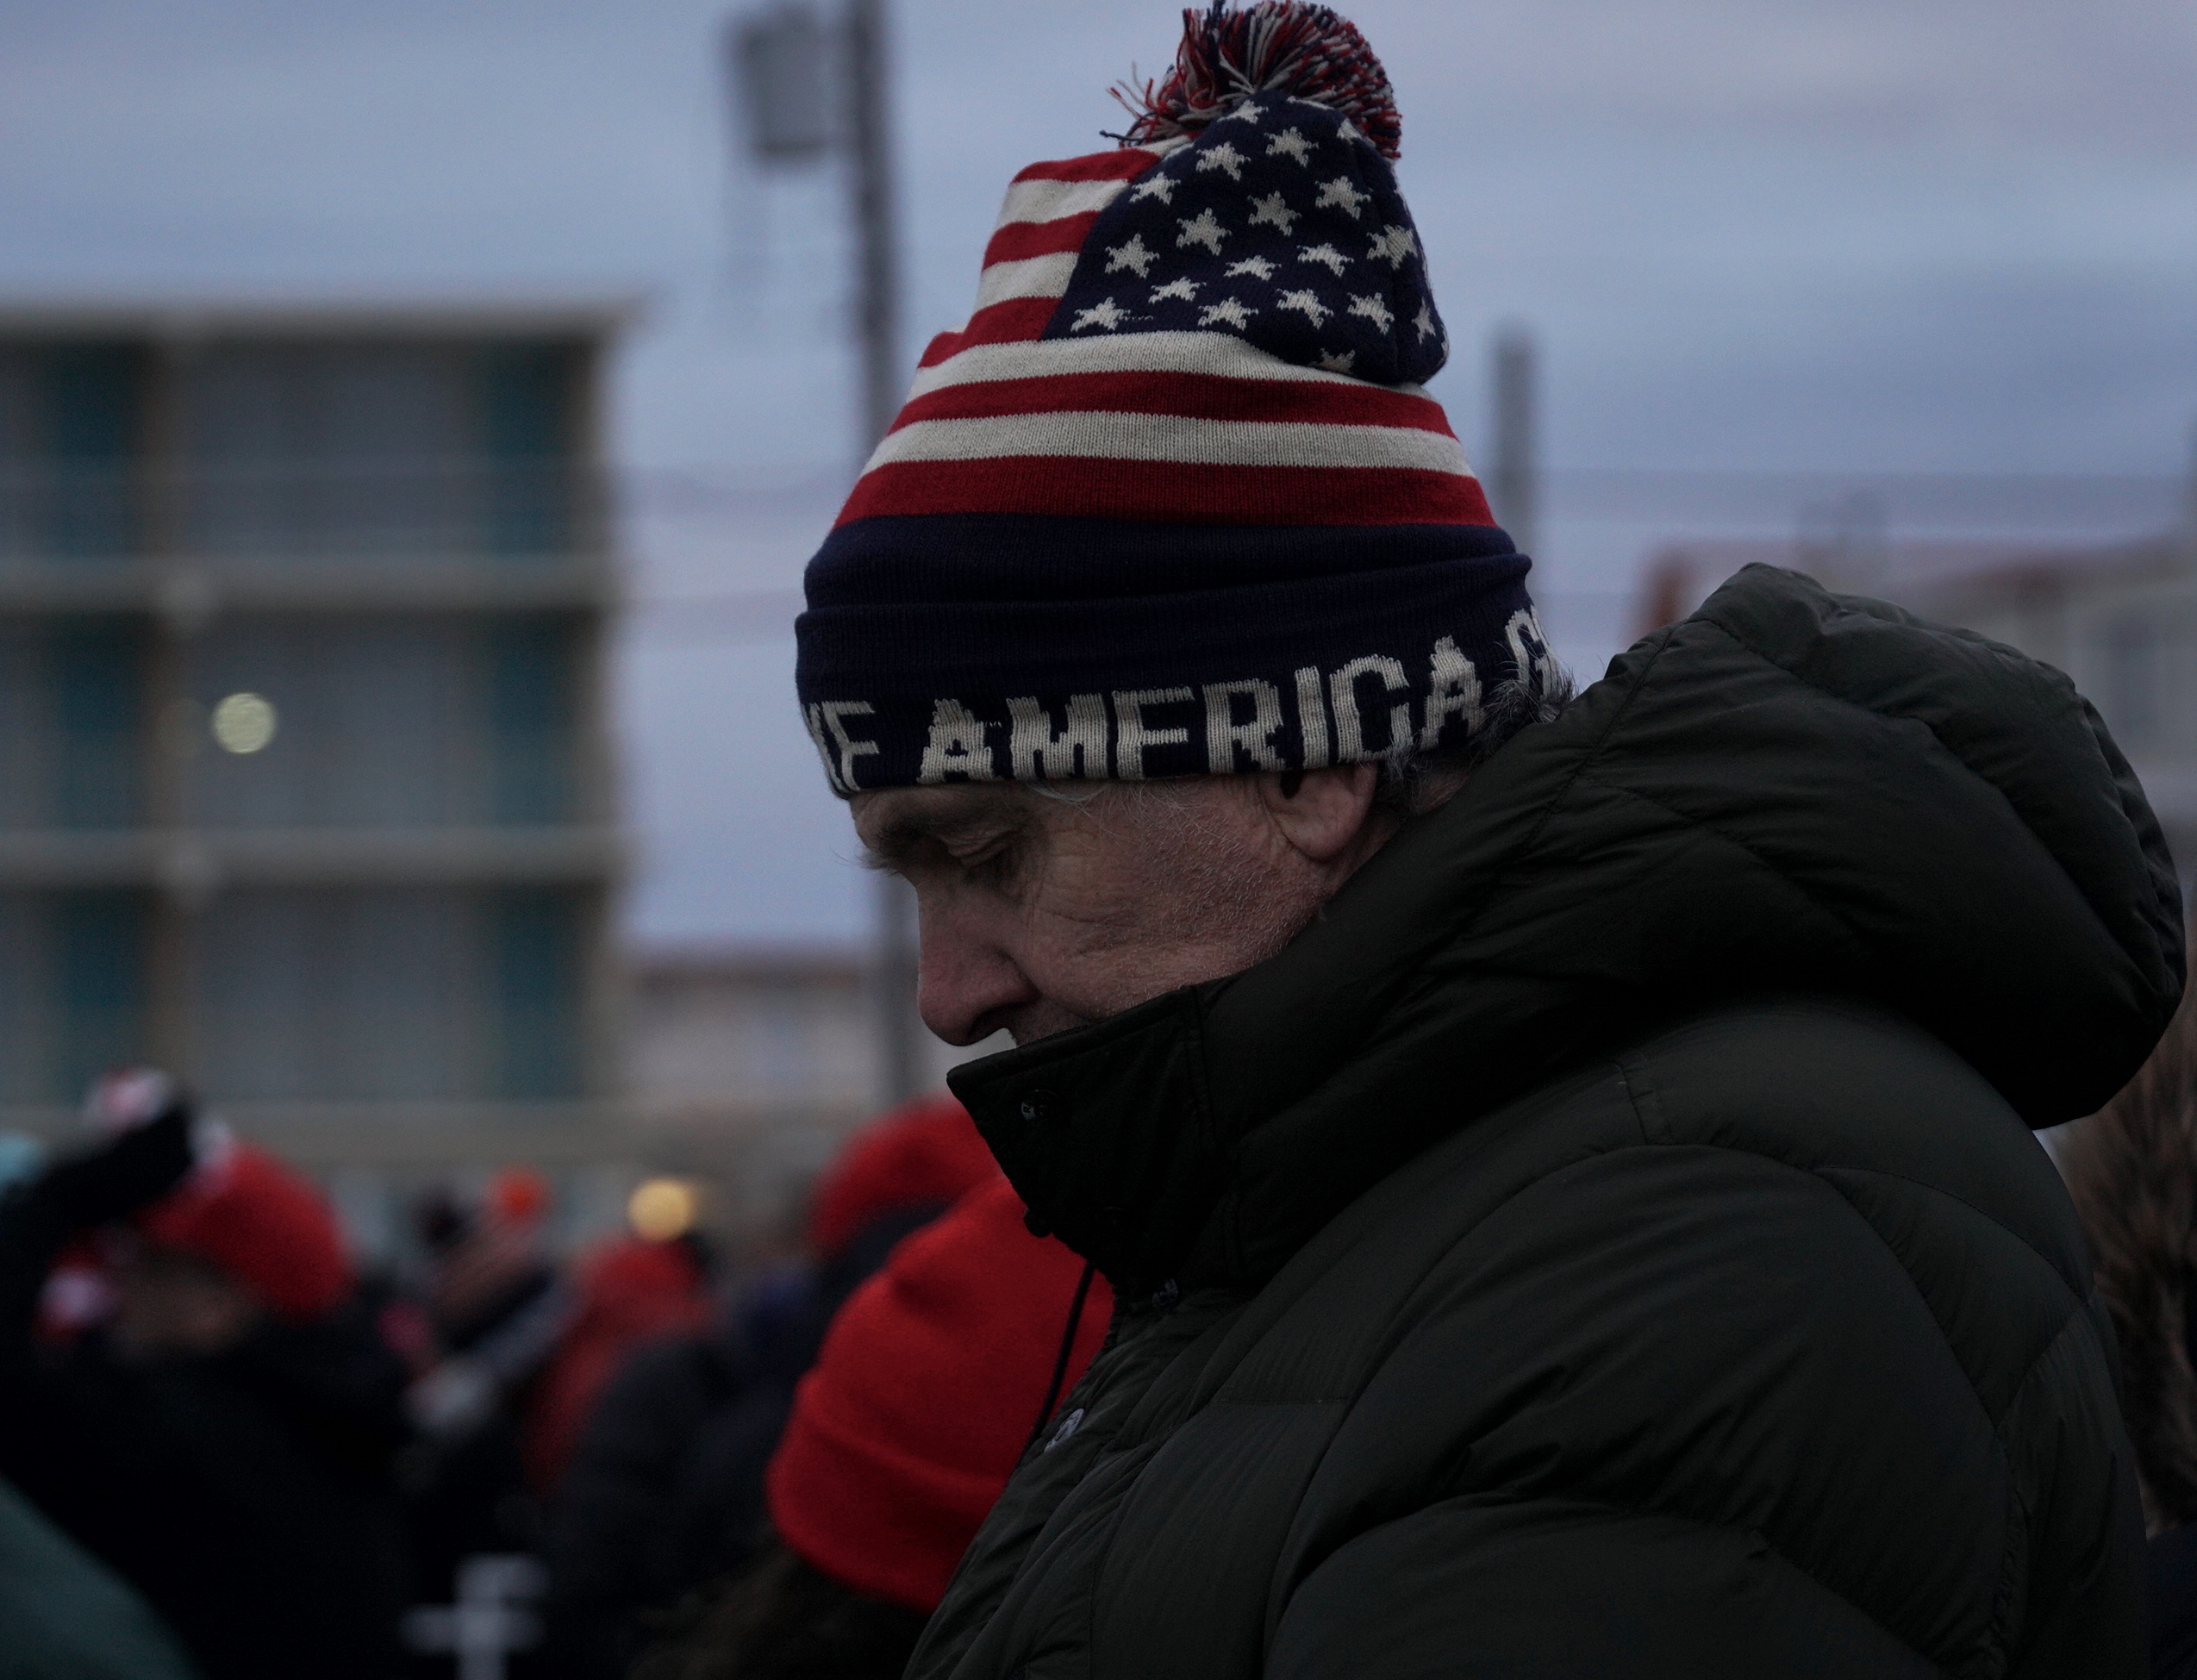 Thousands stood in the frigid conditions to try catch a glimpse of Trump (Azad Essa/MEE)